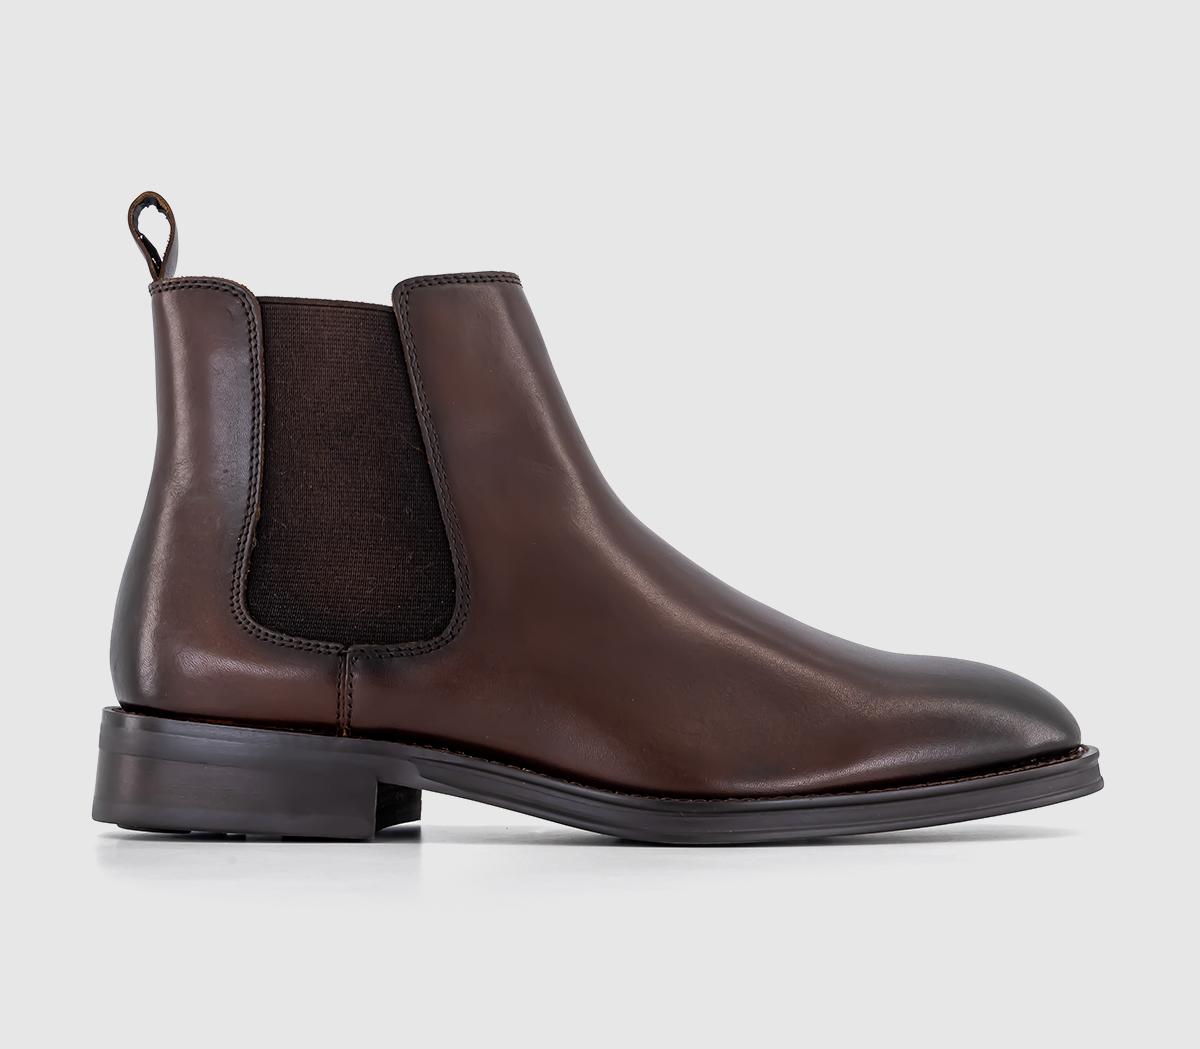 OFFICE Blenheim Chelsea Boots Brown Leather - Men’s Boots